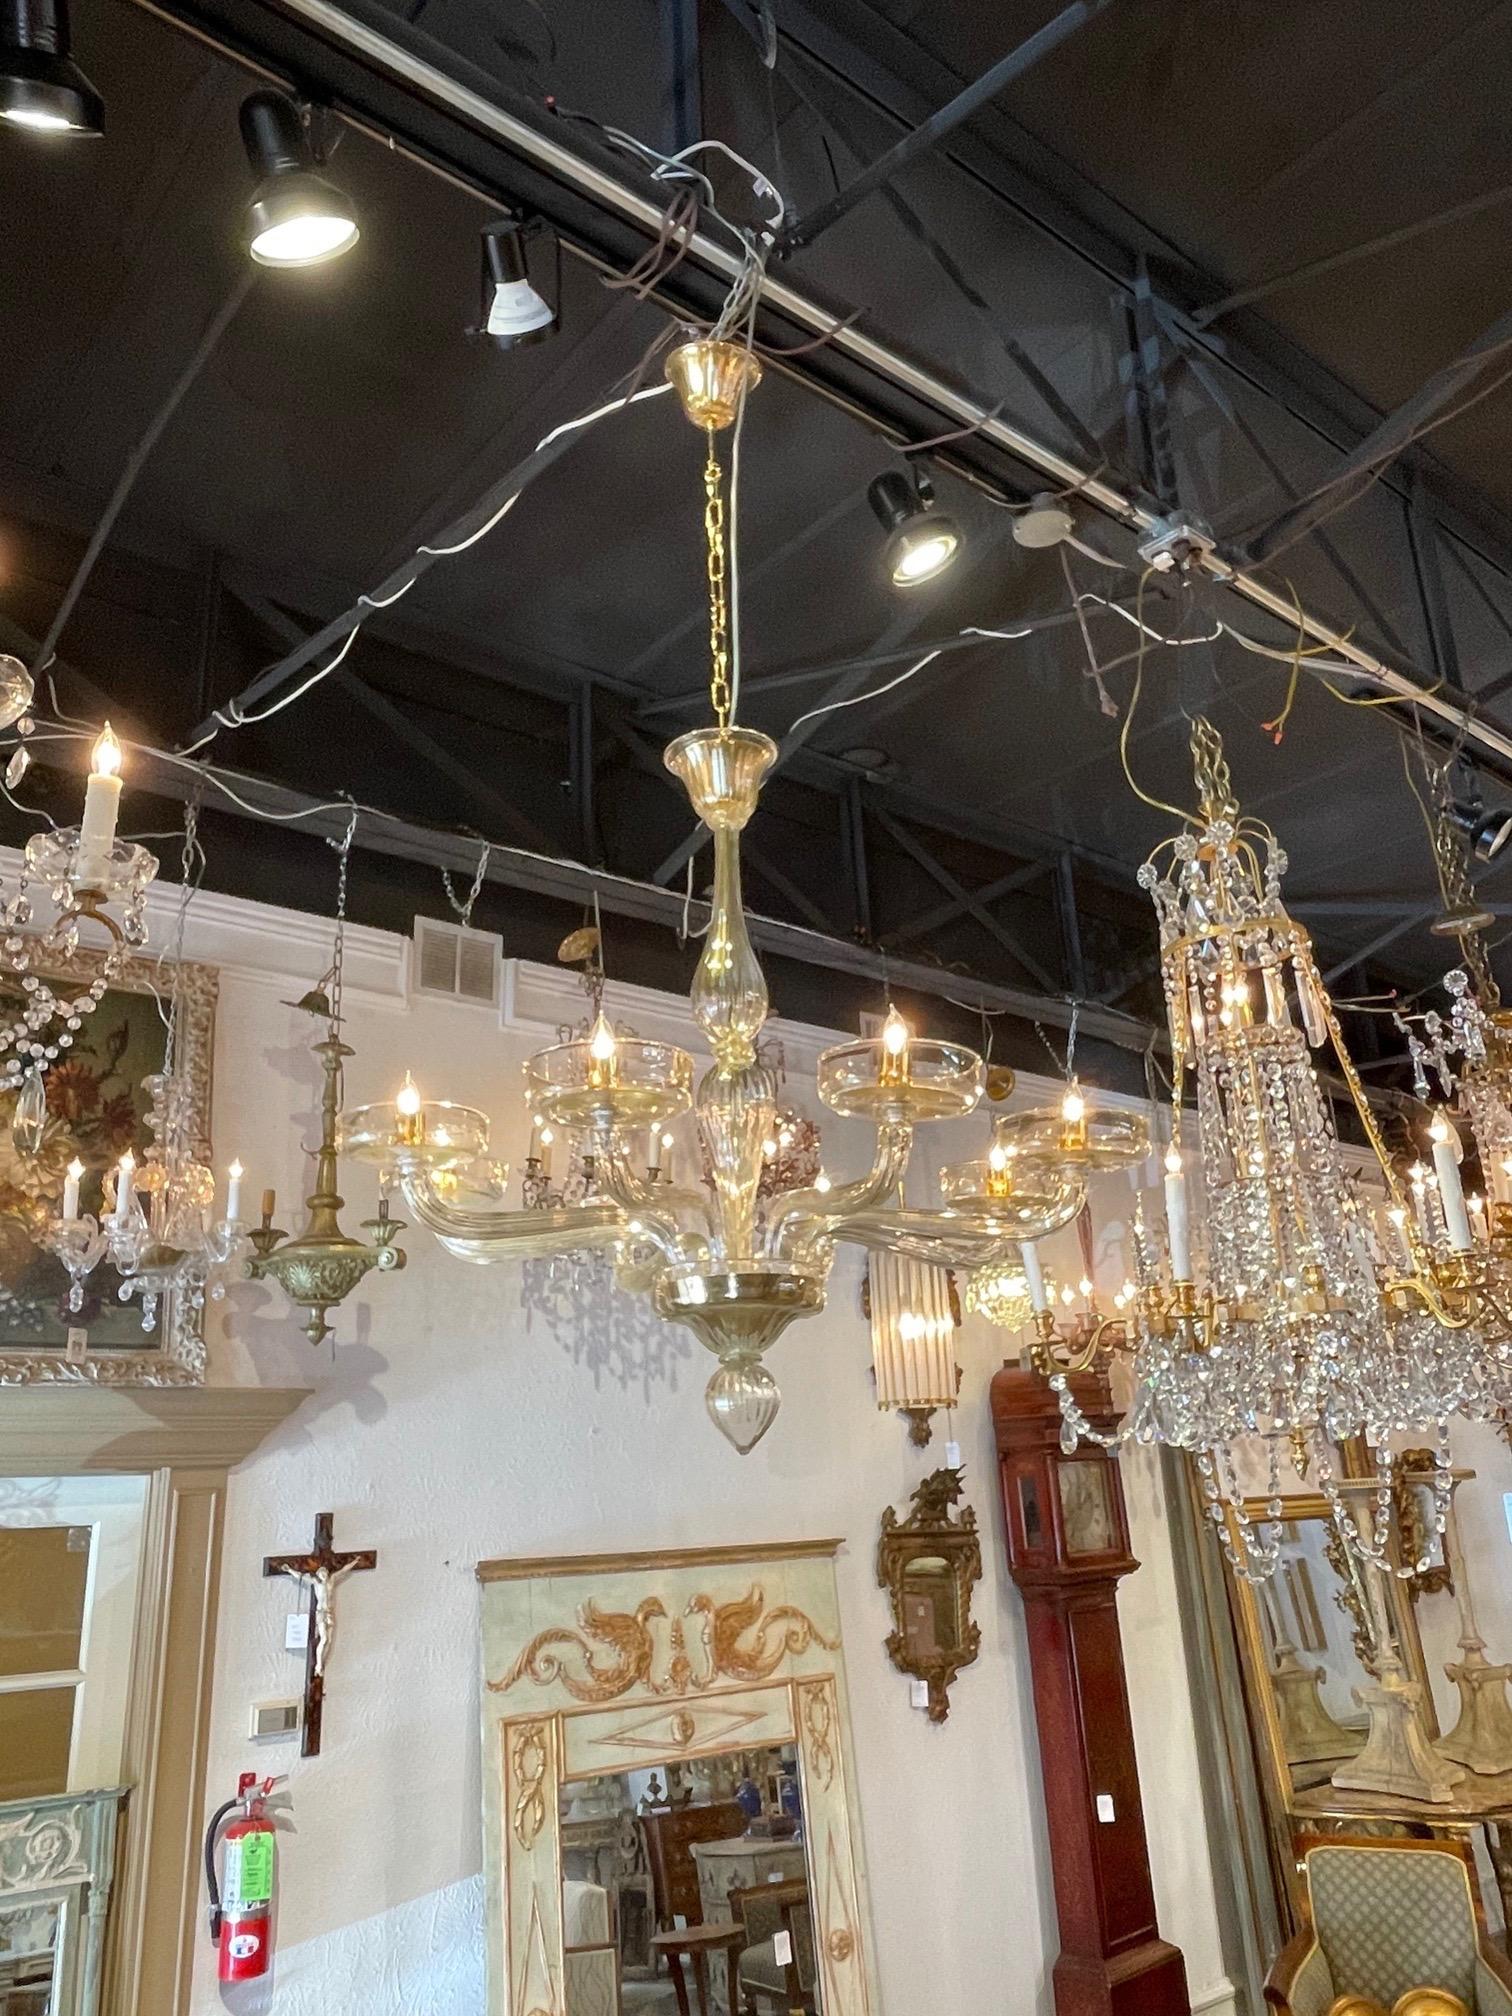 Exquisite pair of gold modern Murano glass chandeliers with 8 arms. Beautiful glistening look and clean lines. Absolutely stunning for a variety of decors!! Note: Price listed is per item.